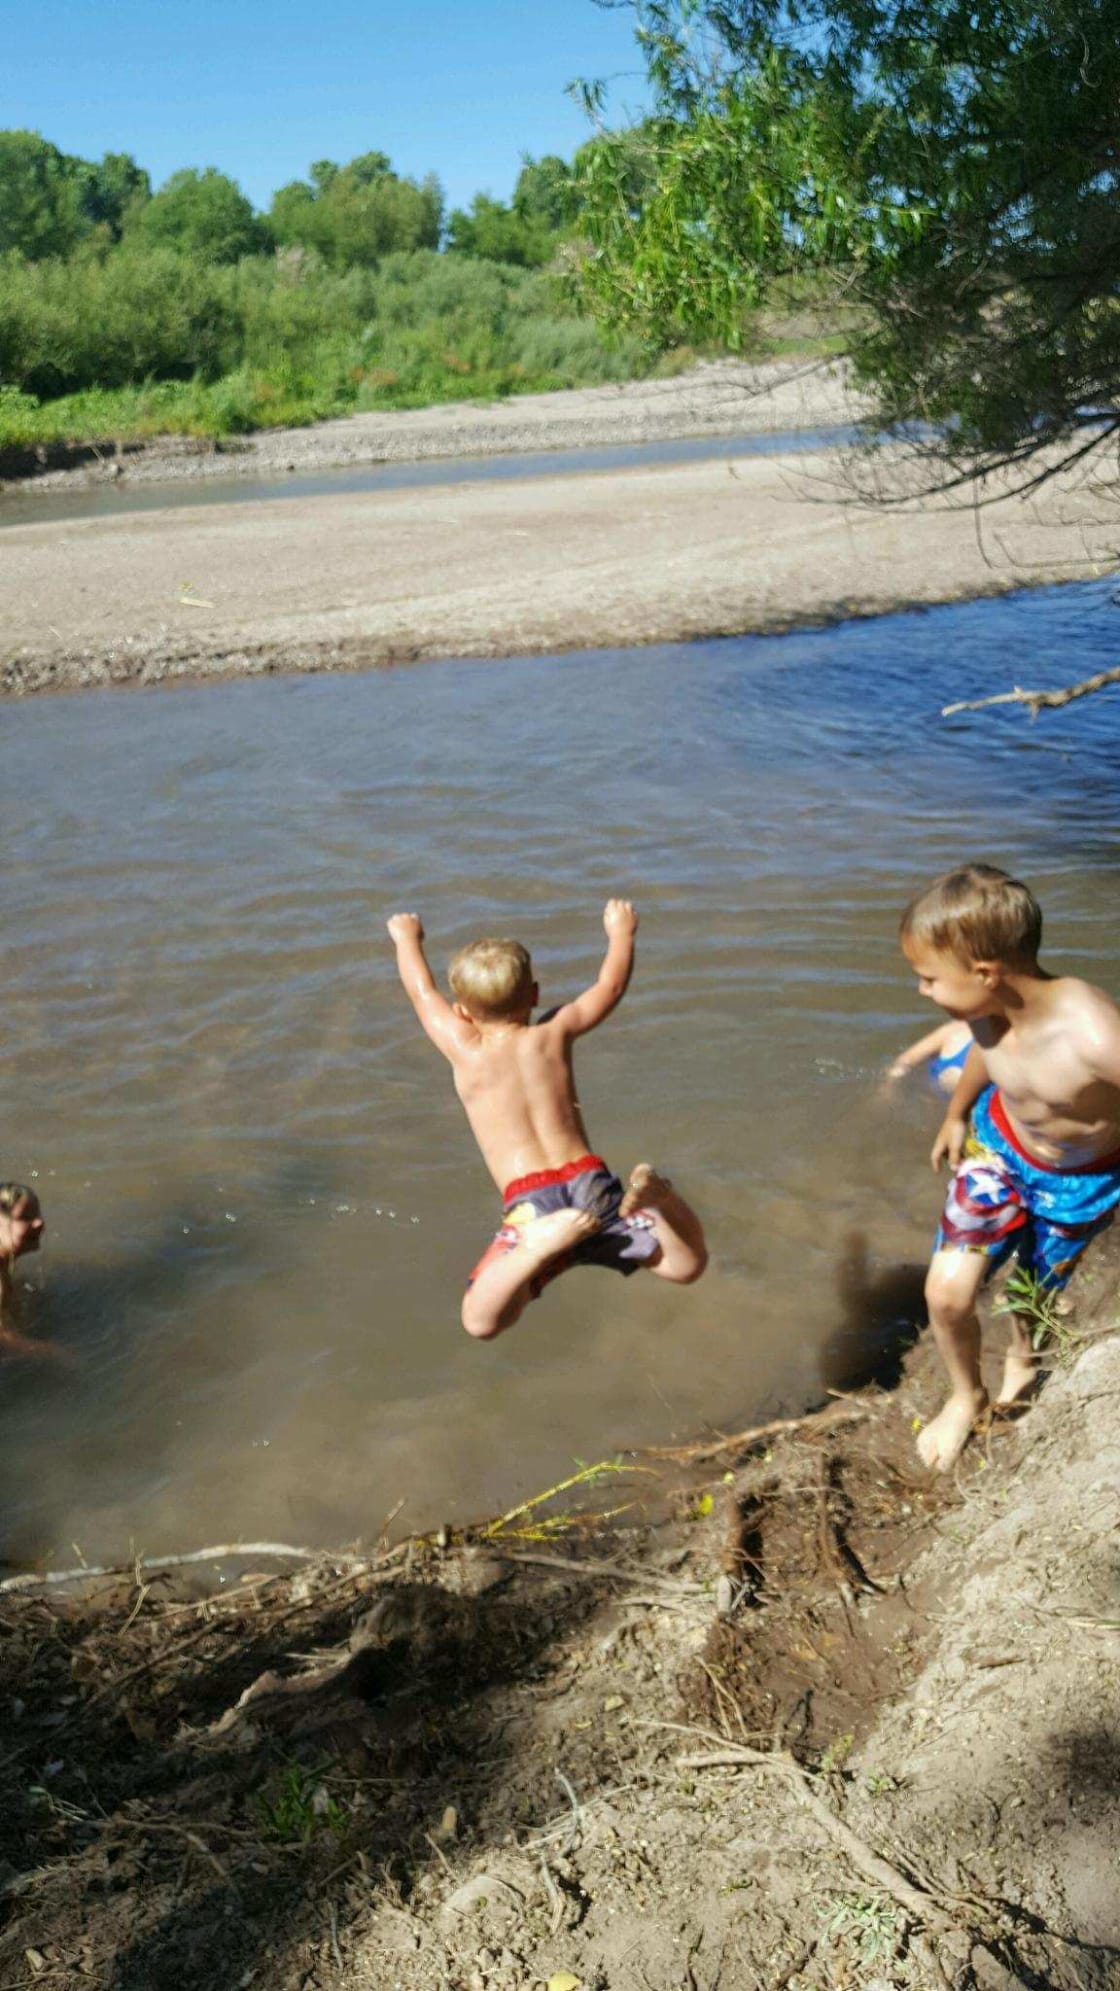 The Boys Jumping into one of the seasonal swimming holes on the Gila River